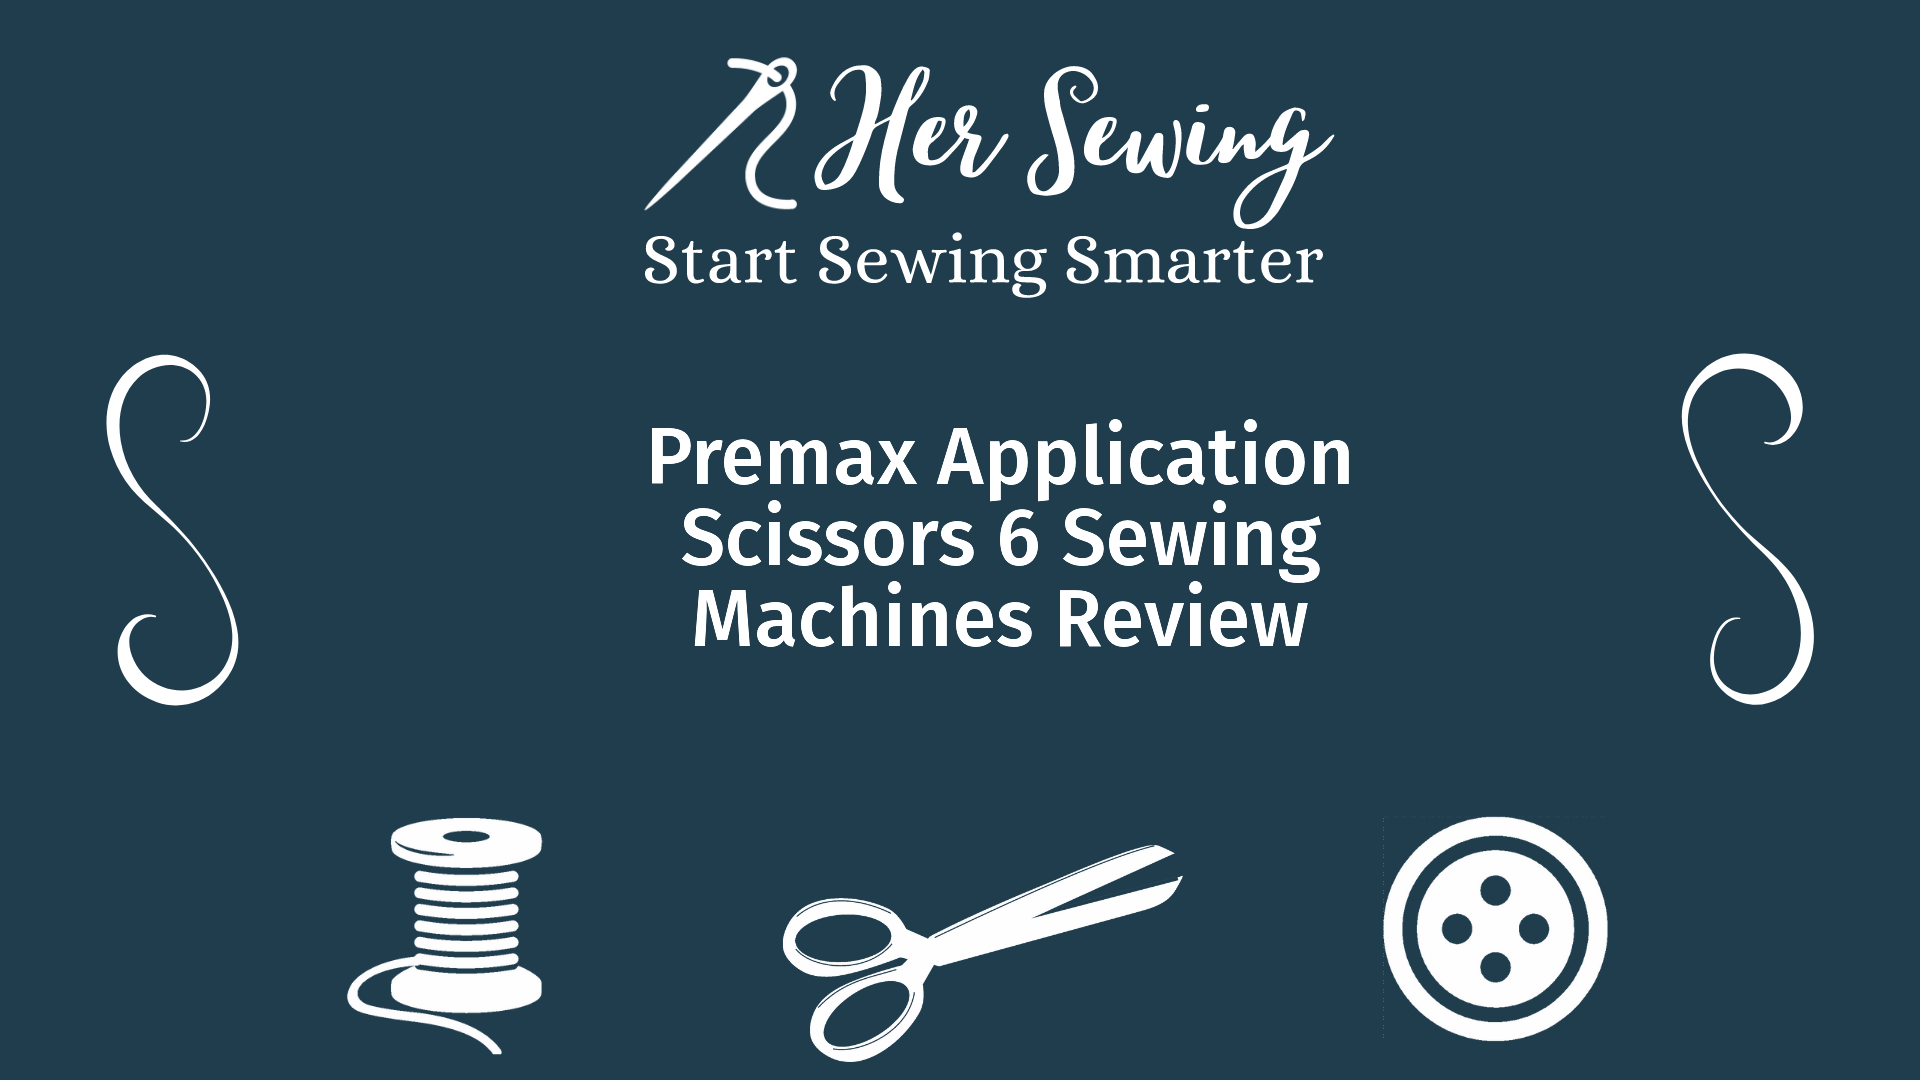 Premax Application Scissors 6 Sewing Machines Review